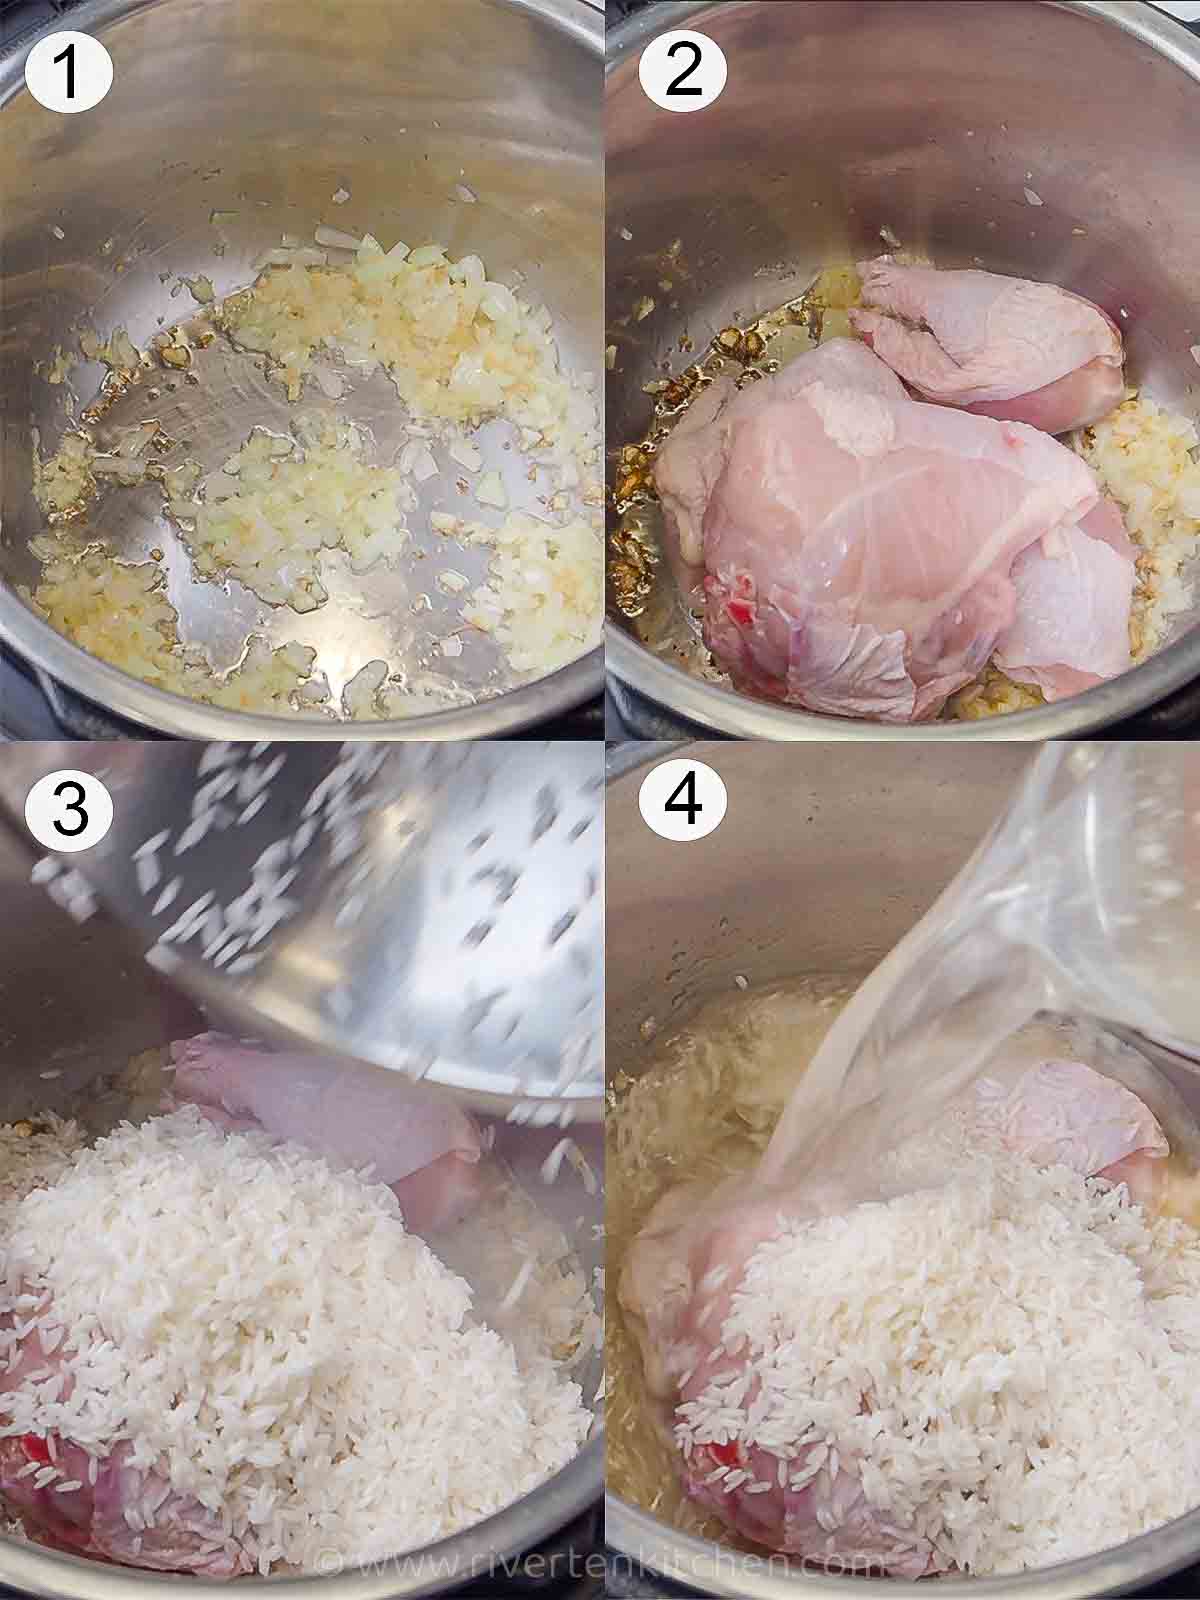 steps on how to cook congee in an instant pot